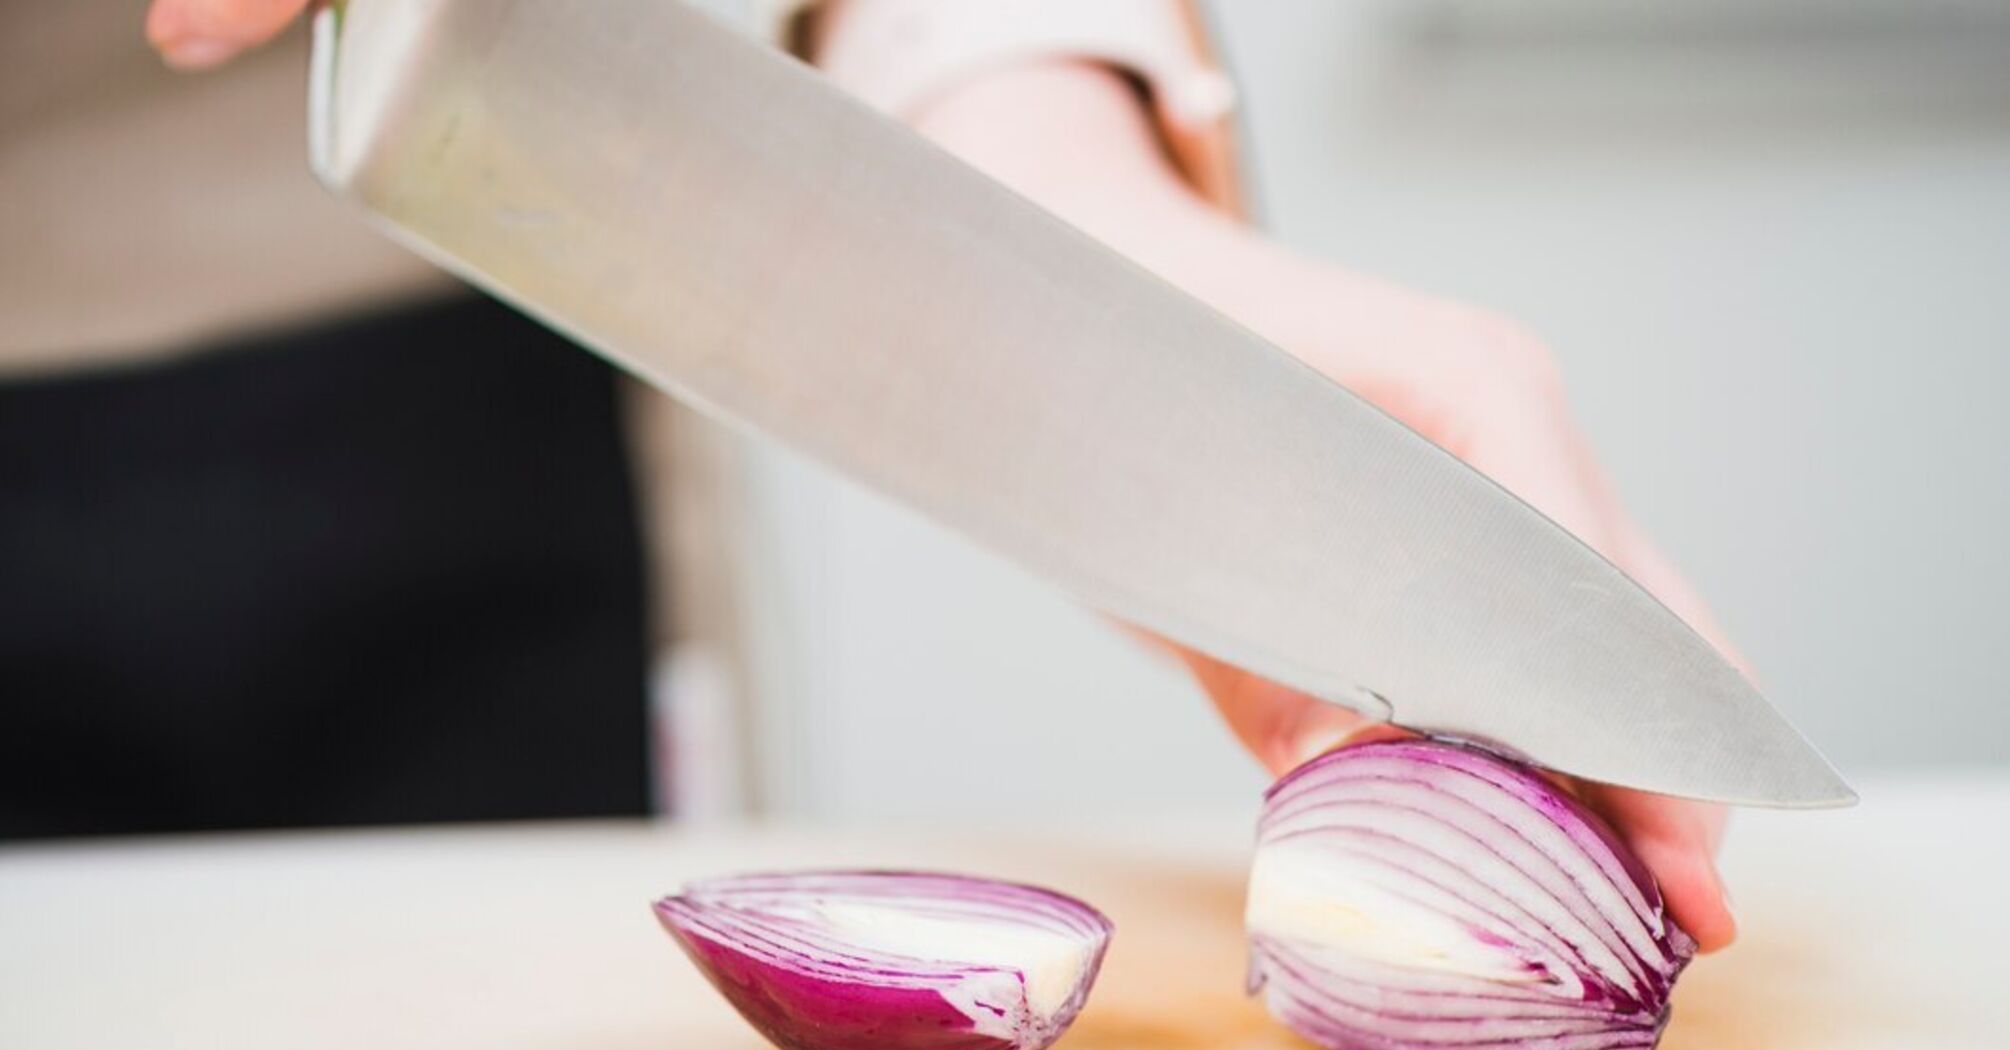 How to chop onions without shedding tears: 4 useful life hacks